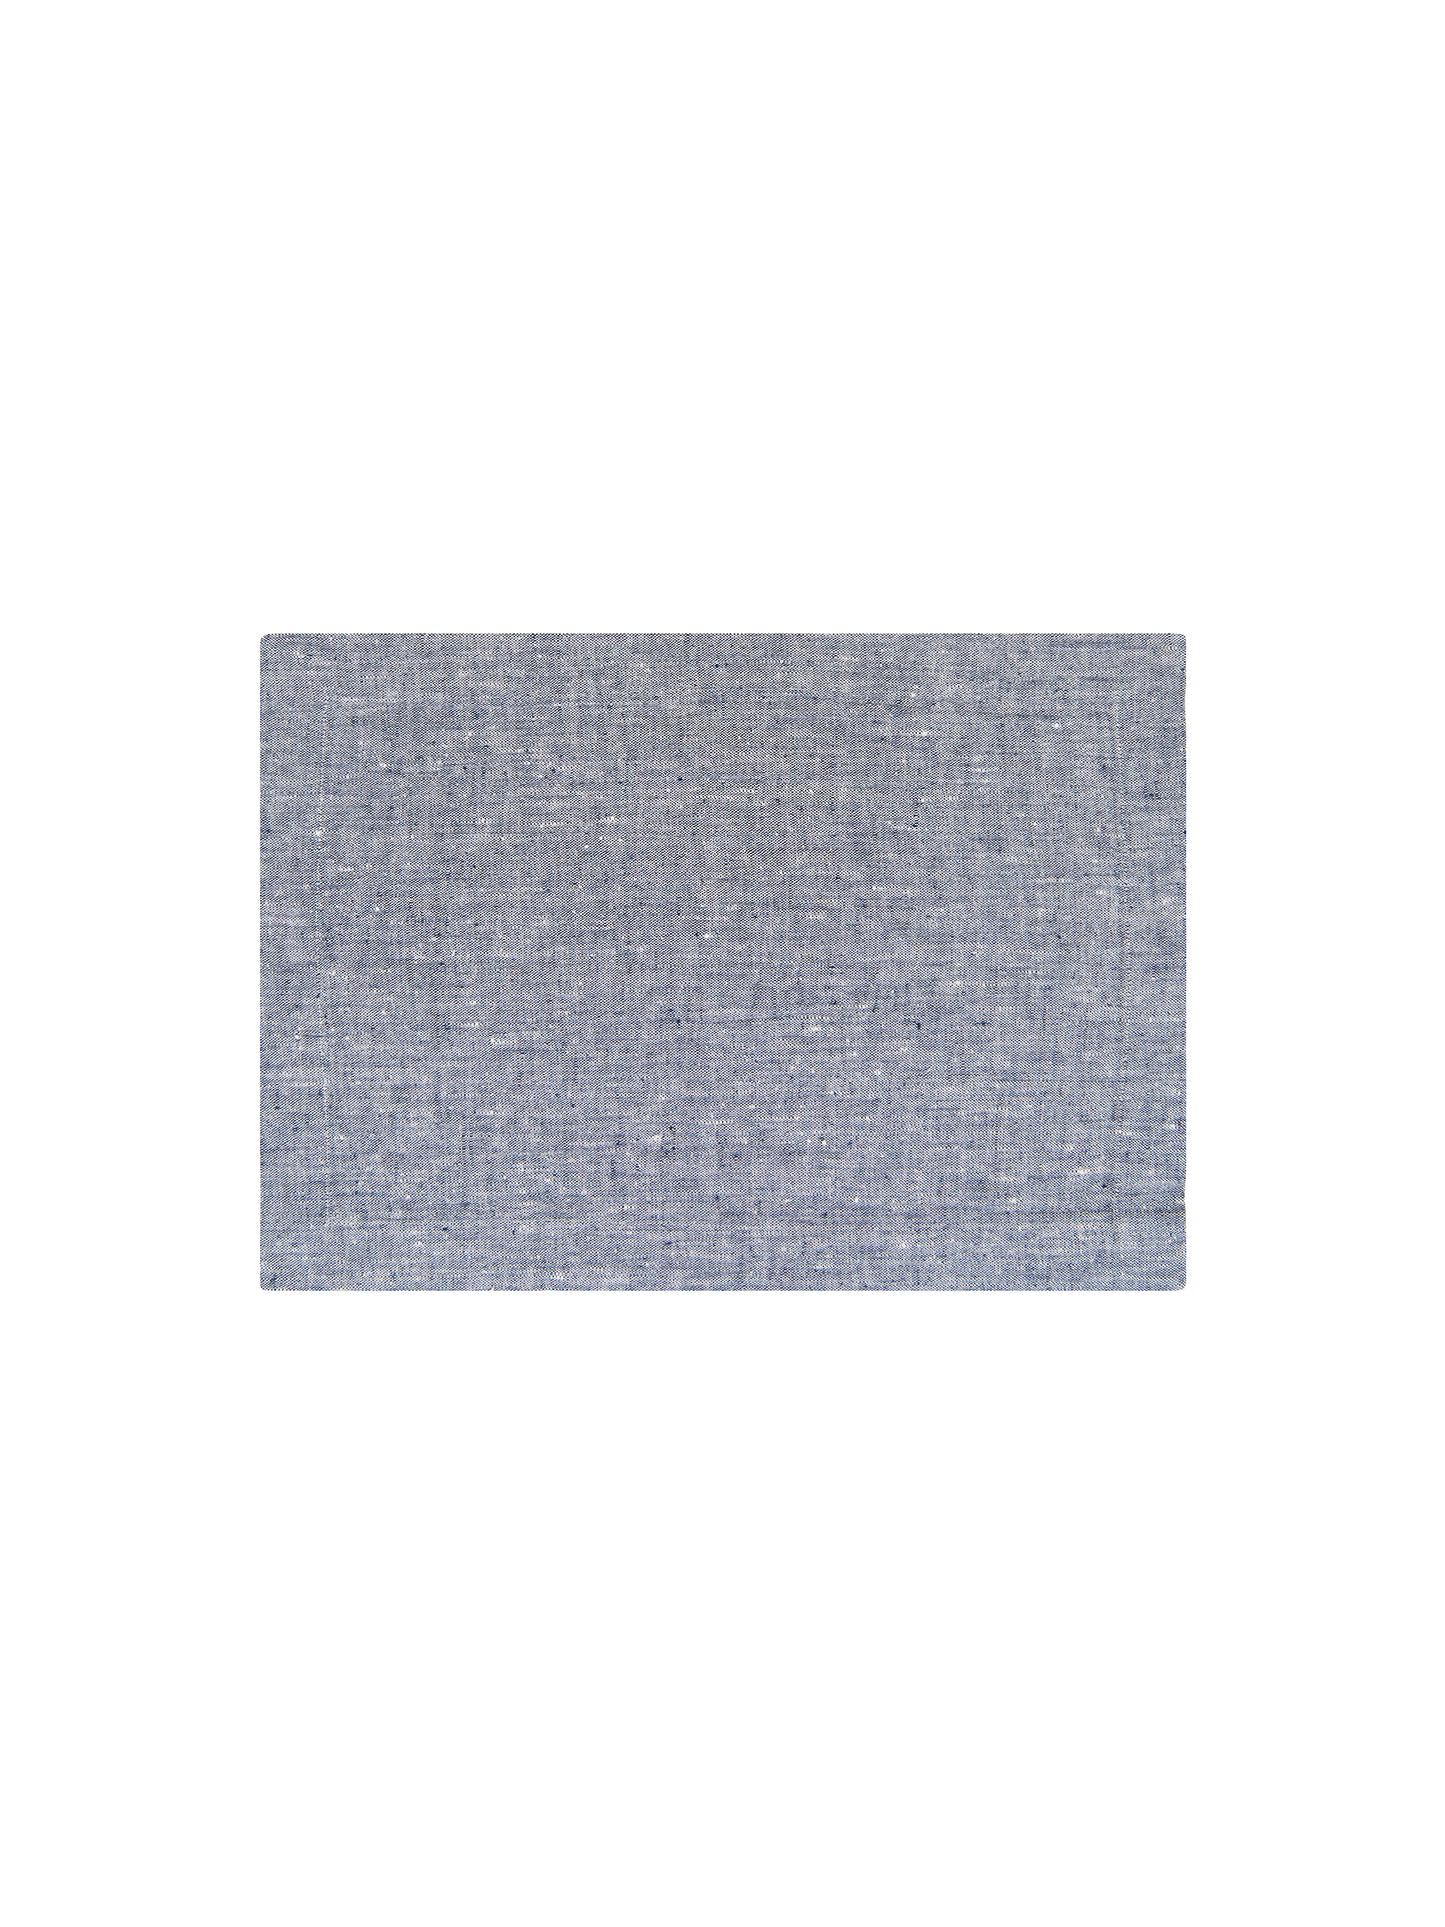 Boston Navy Linen Collection Placemats Weston Table